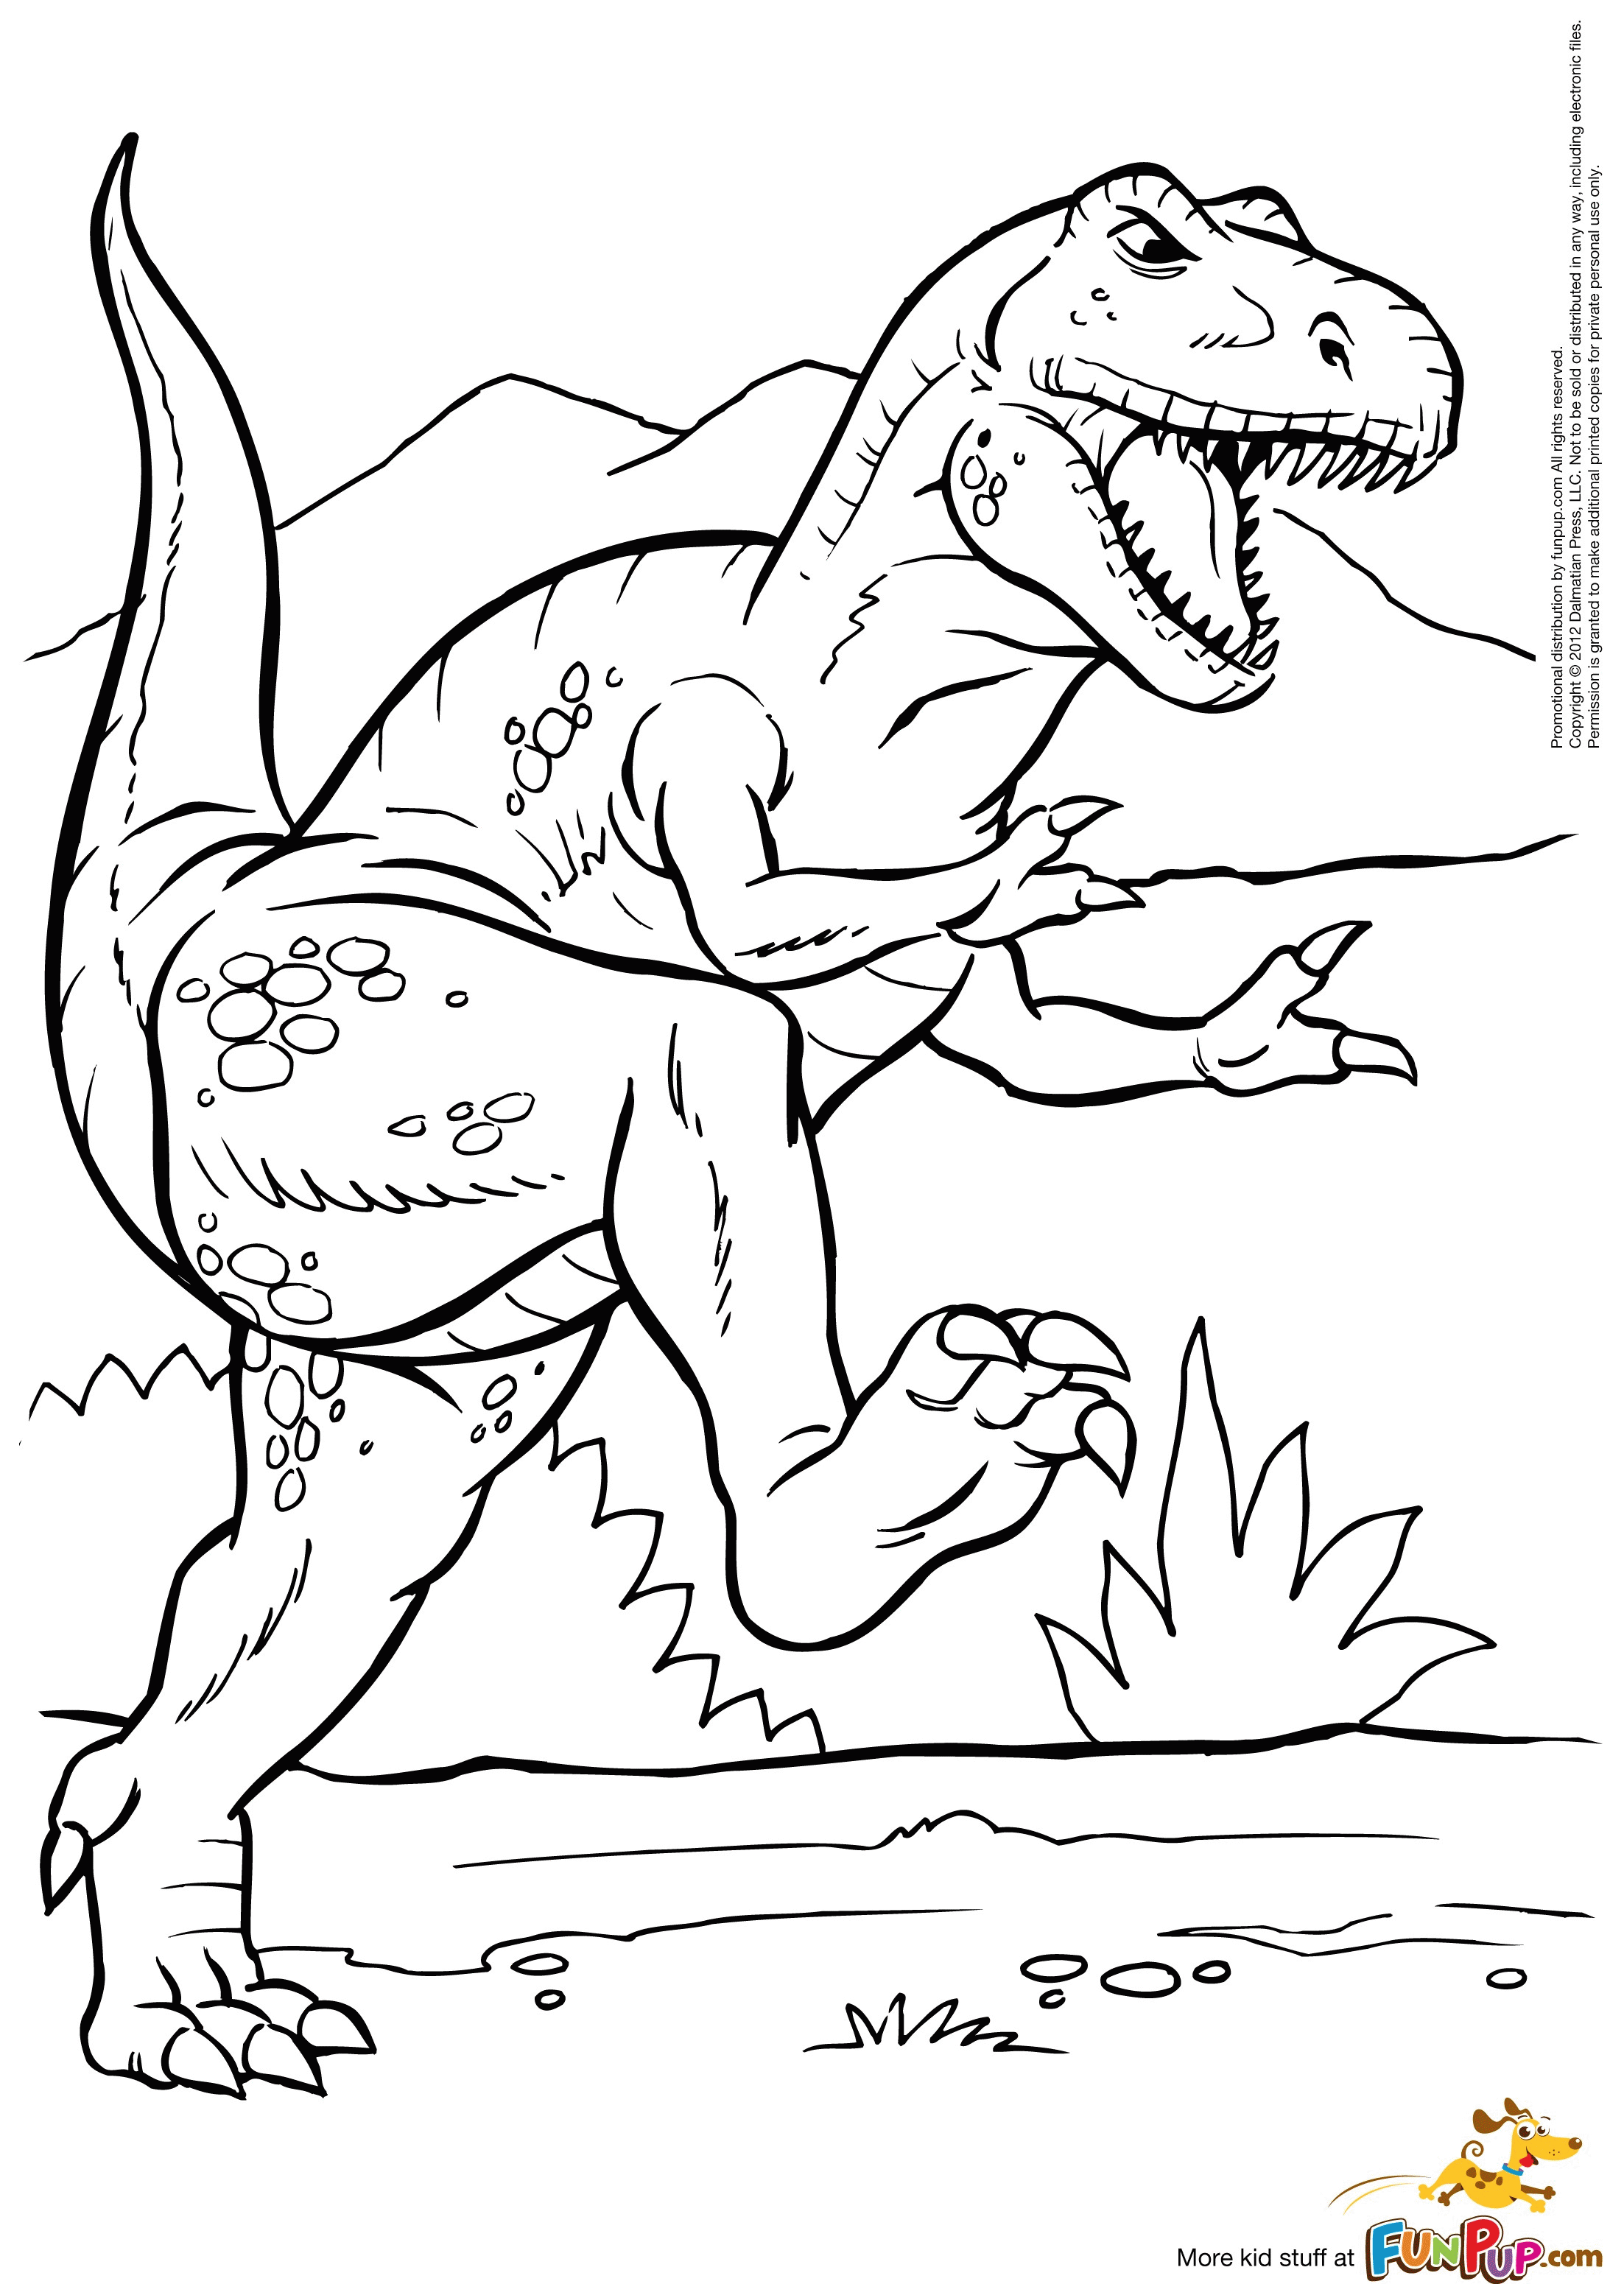 Cute T-rex Coloring Page - Coloring Home